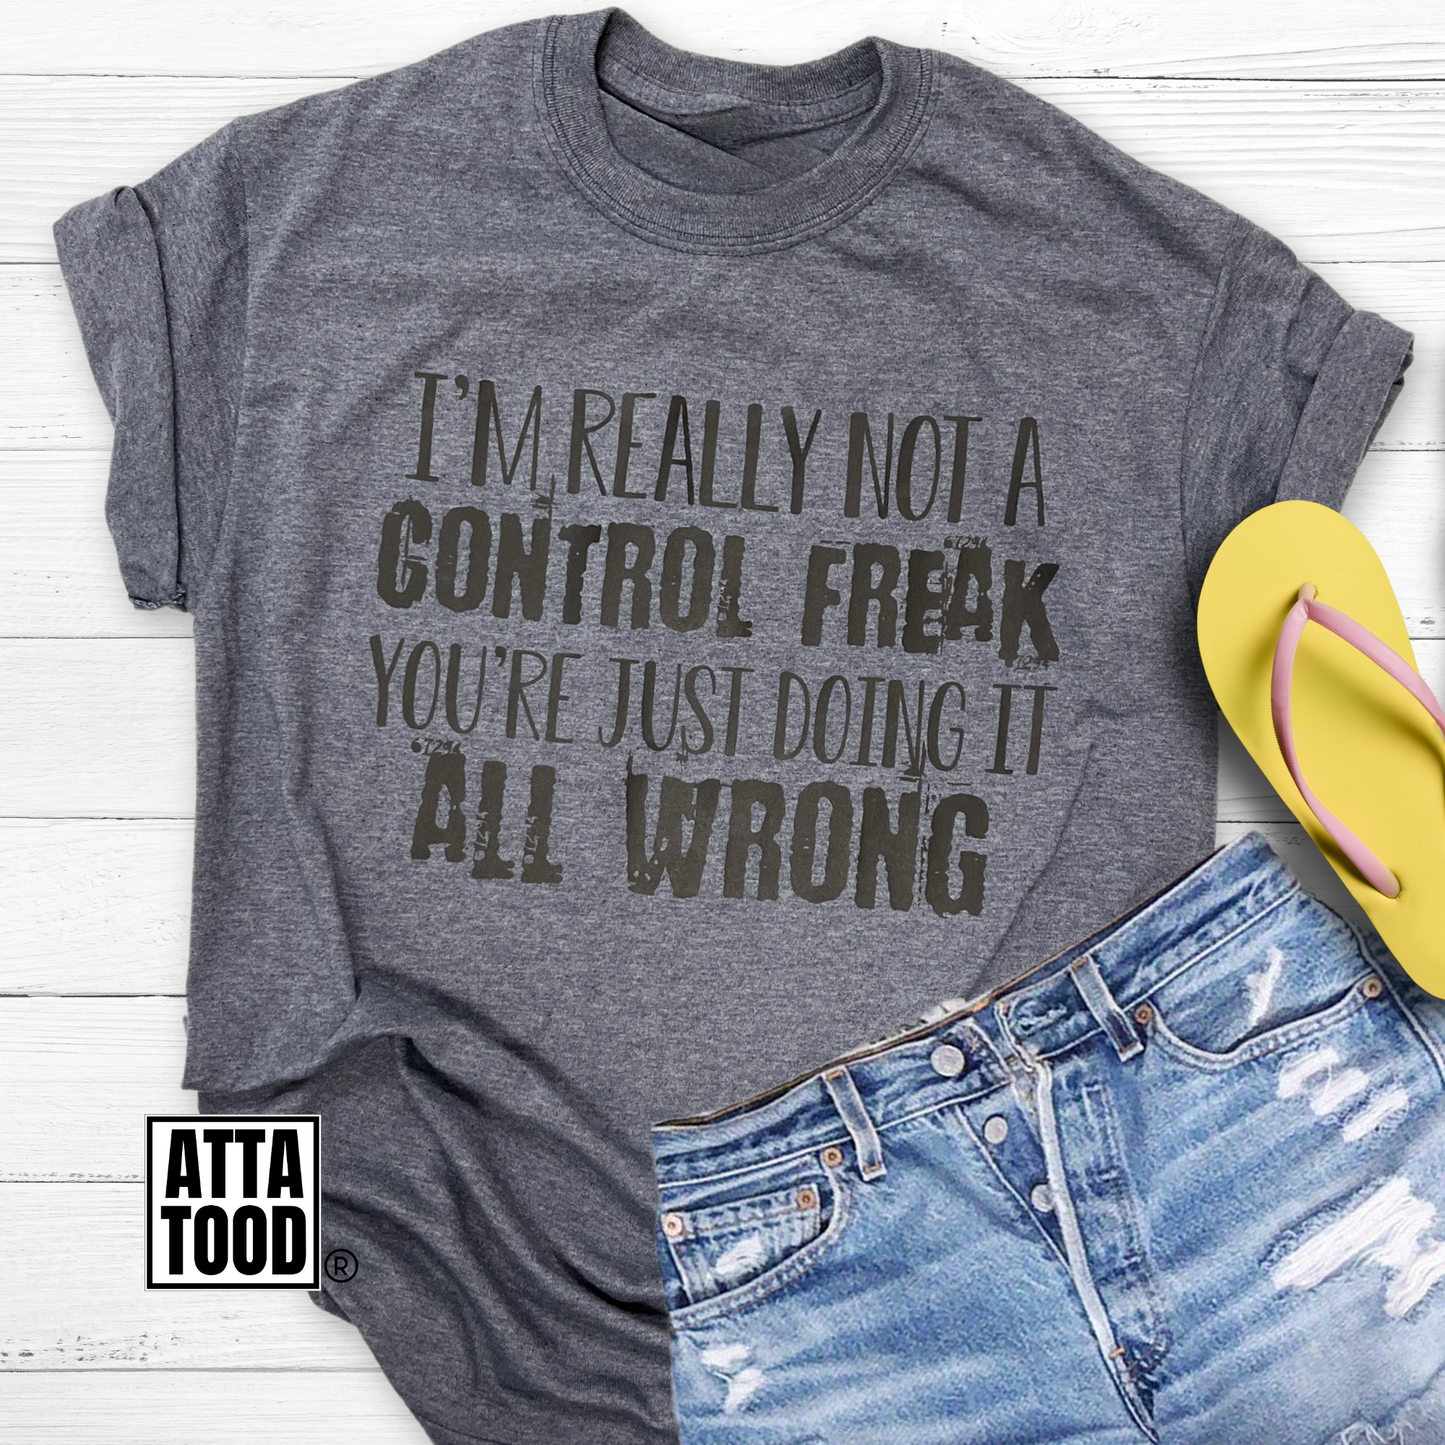 I’m really not a control freak you’re just doing it all wrong